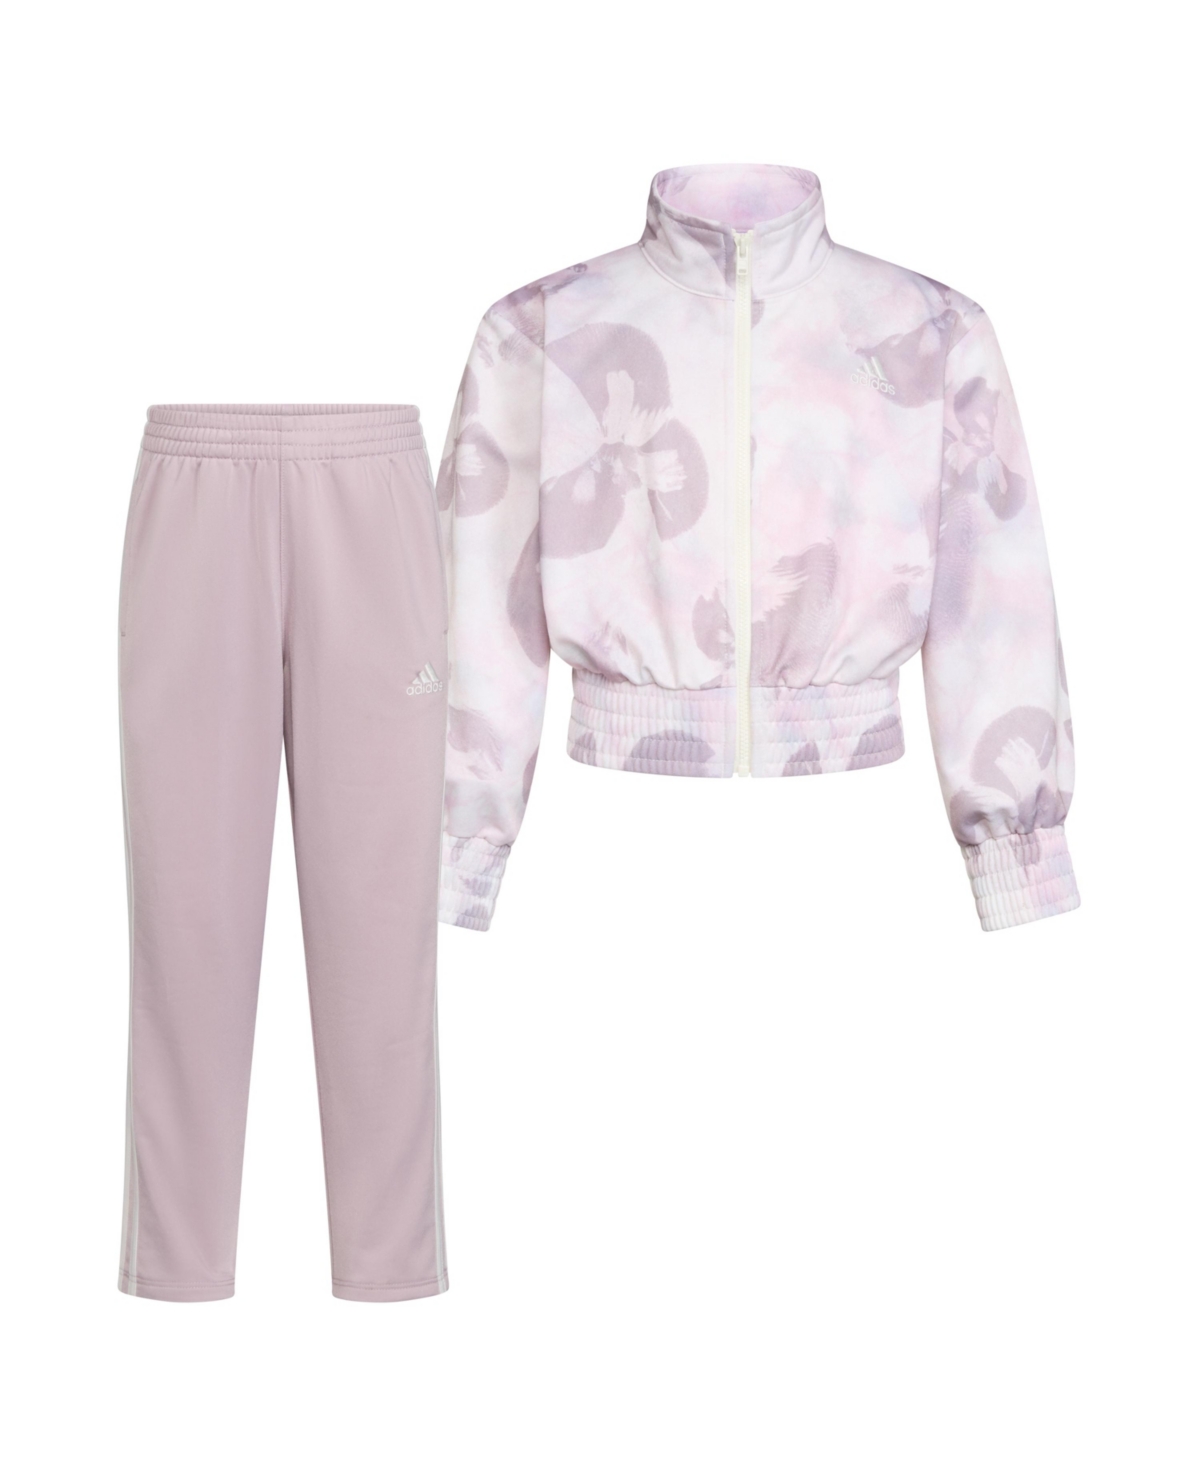 Shop Adidas Originals Little Girls Printed Fashion Tricot Jacket And Pants, 2 Piece Set In Off White